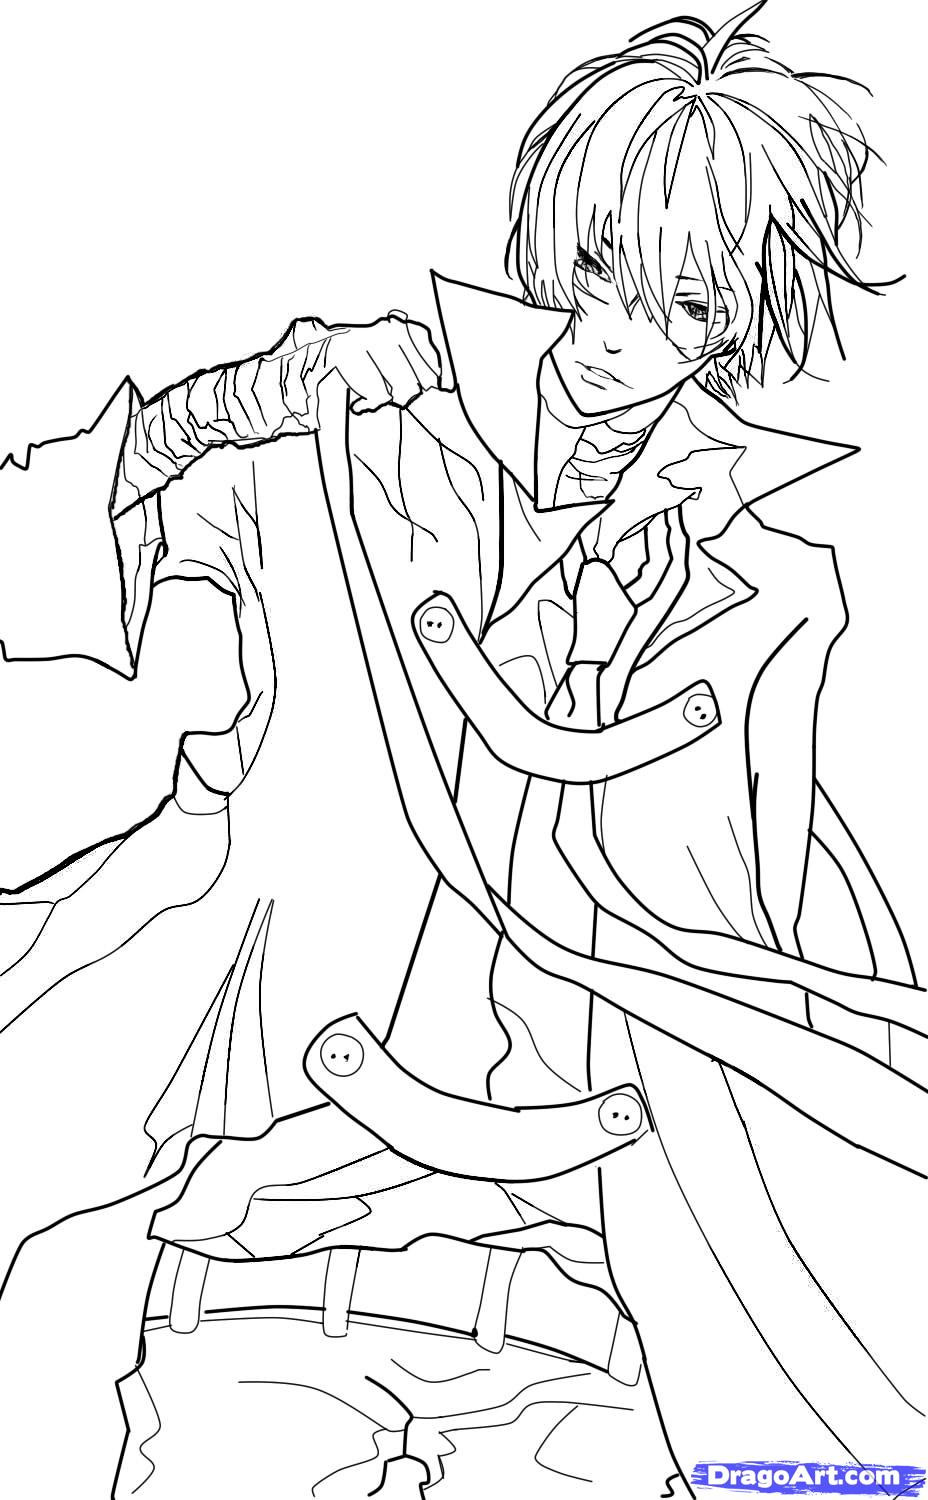 Anime Coloring Pages Boys
 How to Sketch an Anime Boy Step by Step Anime People